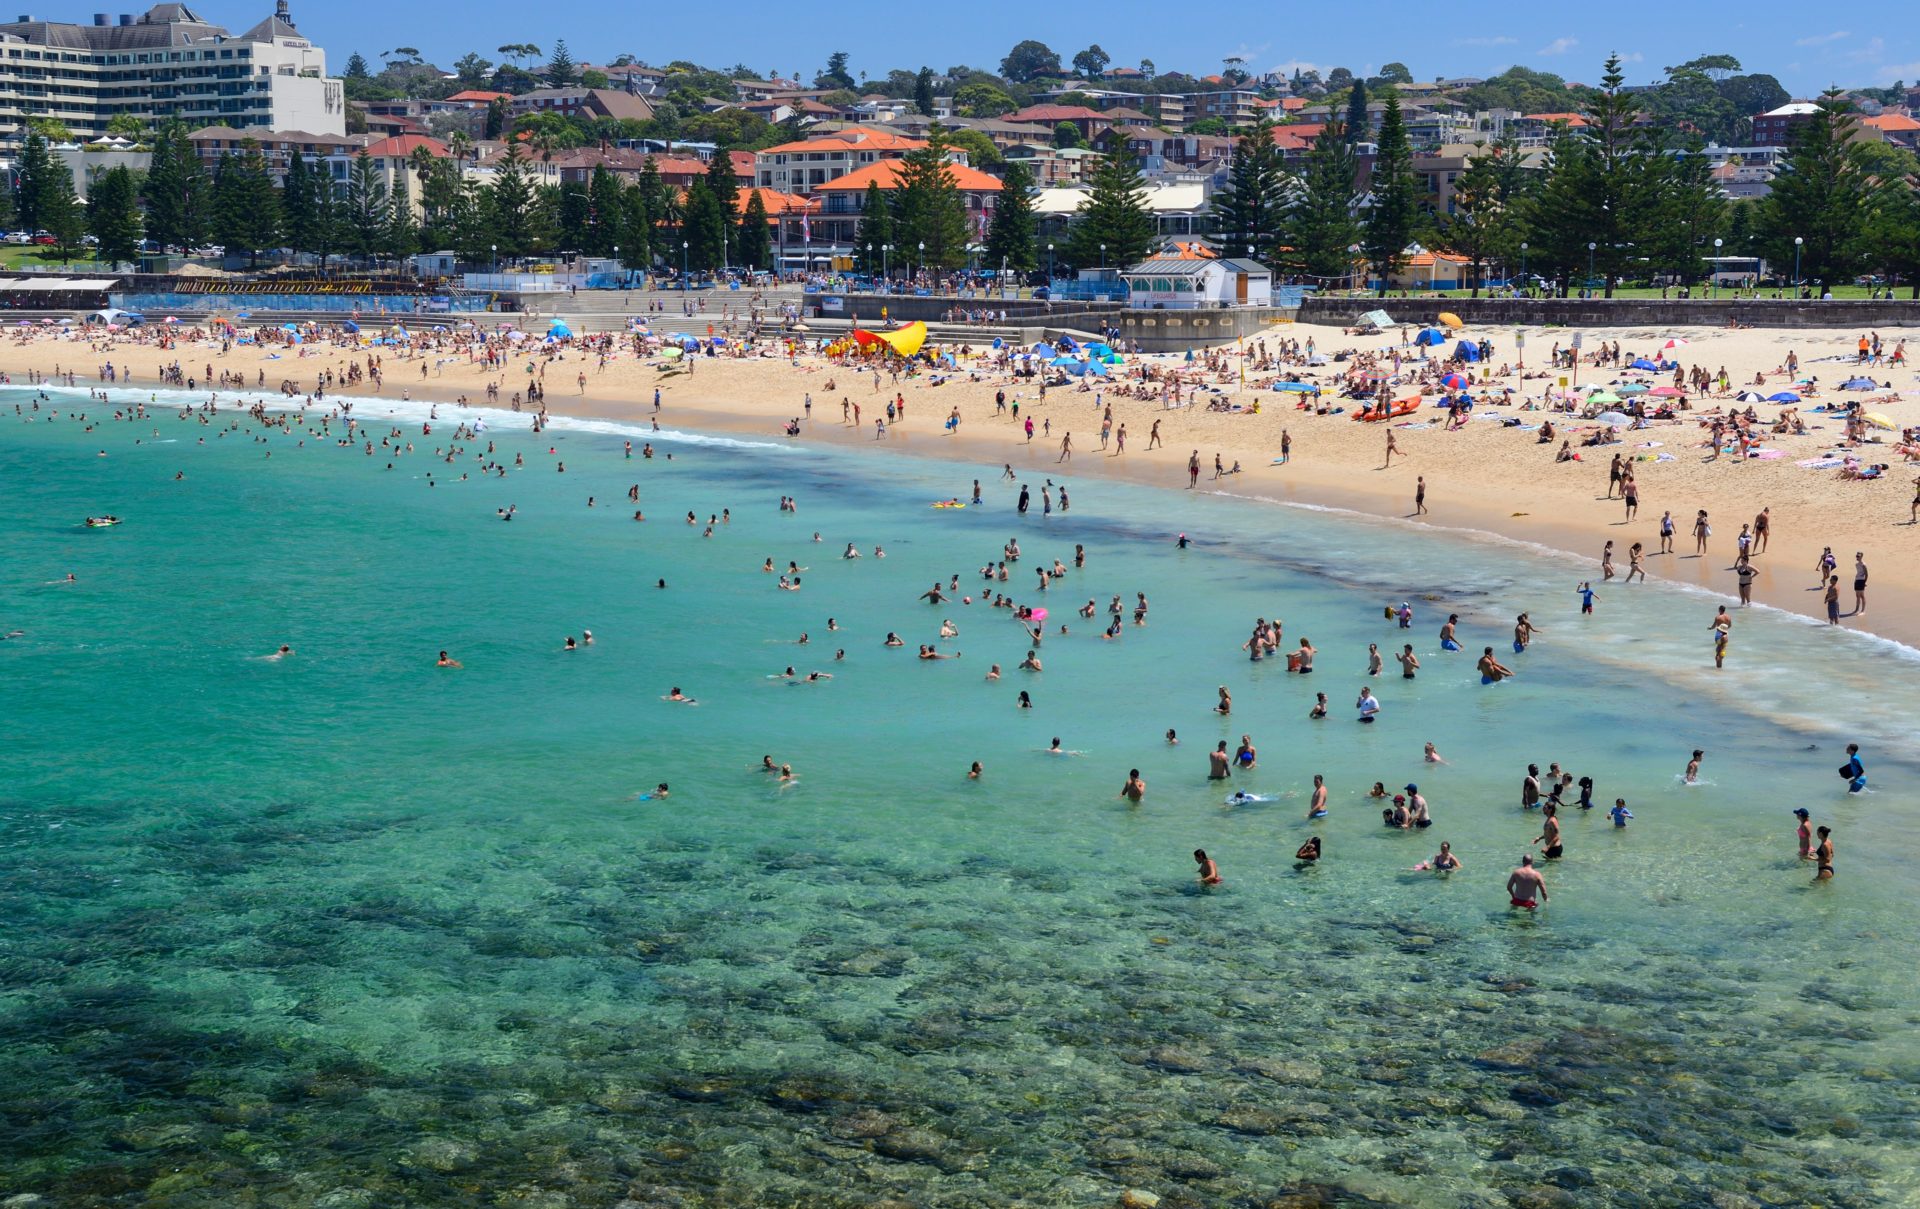 Sunbathers on Coogee Beach in New South Wales, Australia, 11-2-17